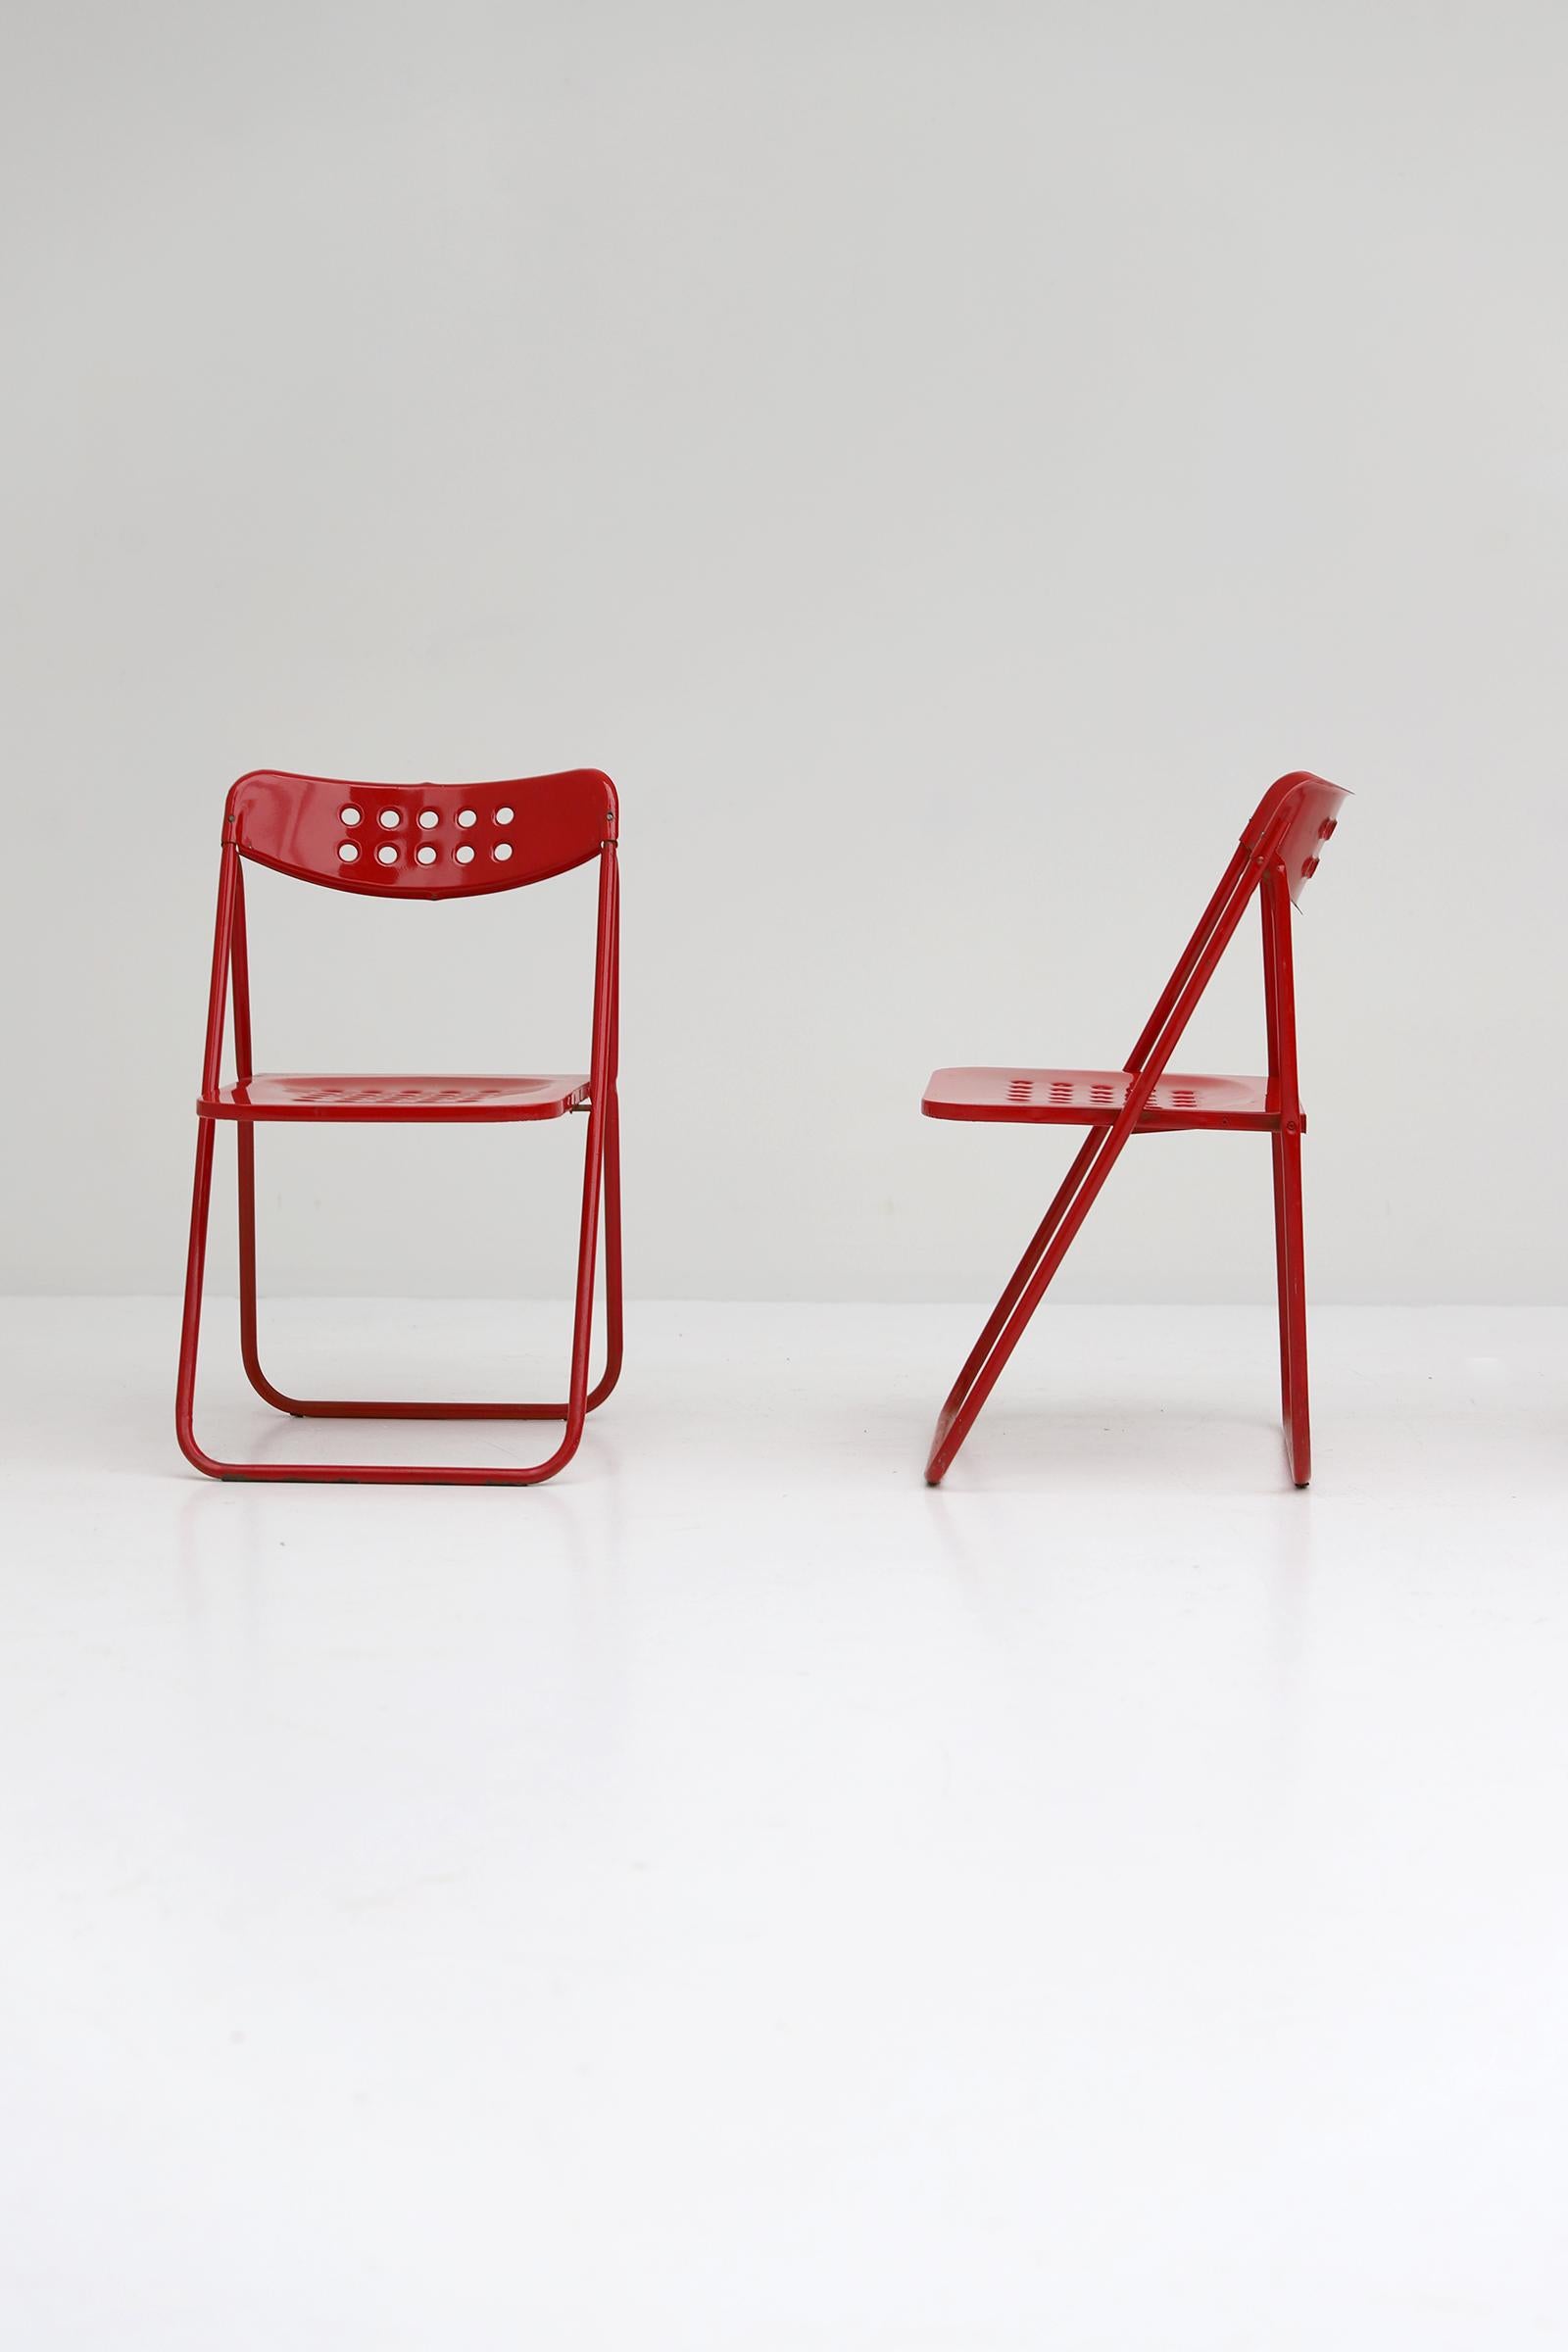 Late 20th Century Set of Four Modern Red Lacquered Metal Folding Chairs 1980s For Sale